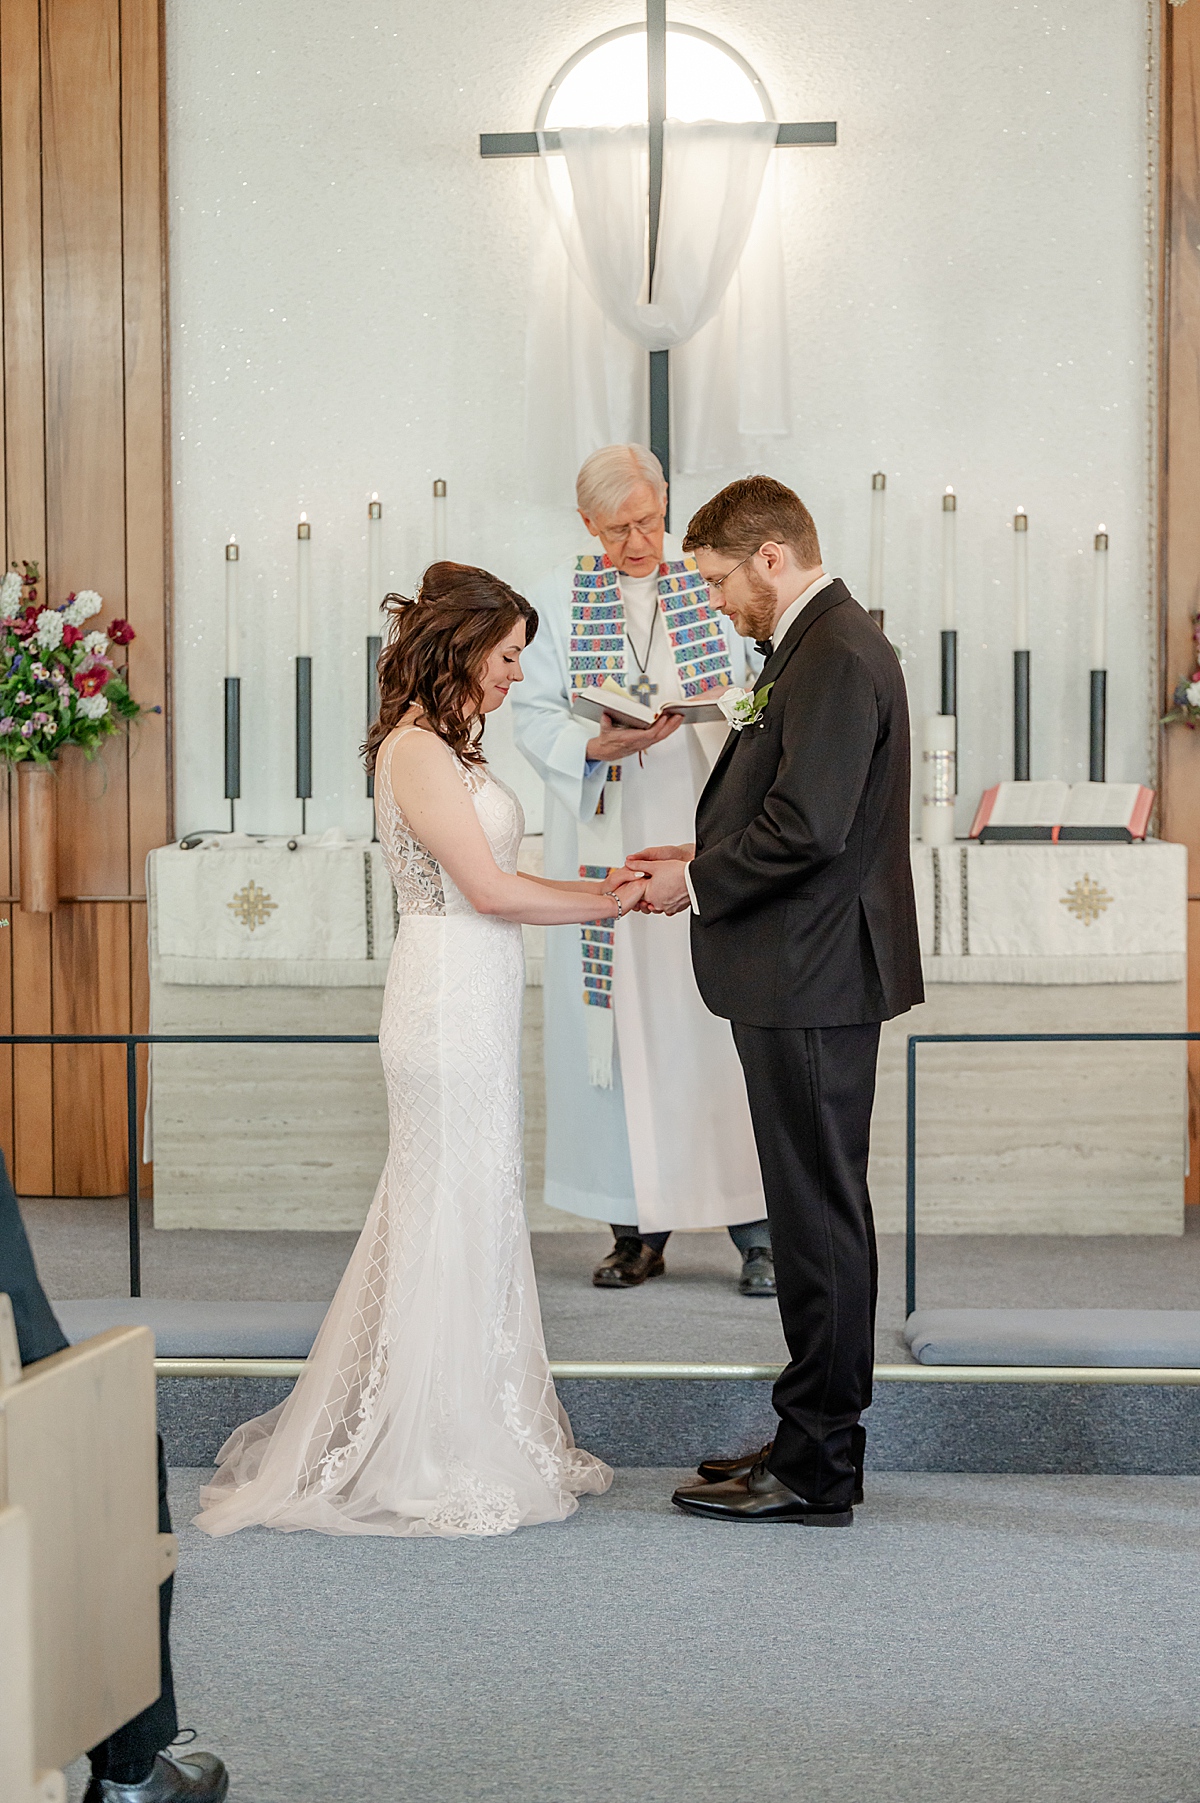 Bride and Groom holding hands in prayer at the front of the church.